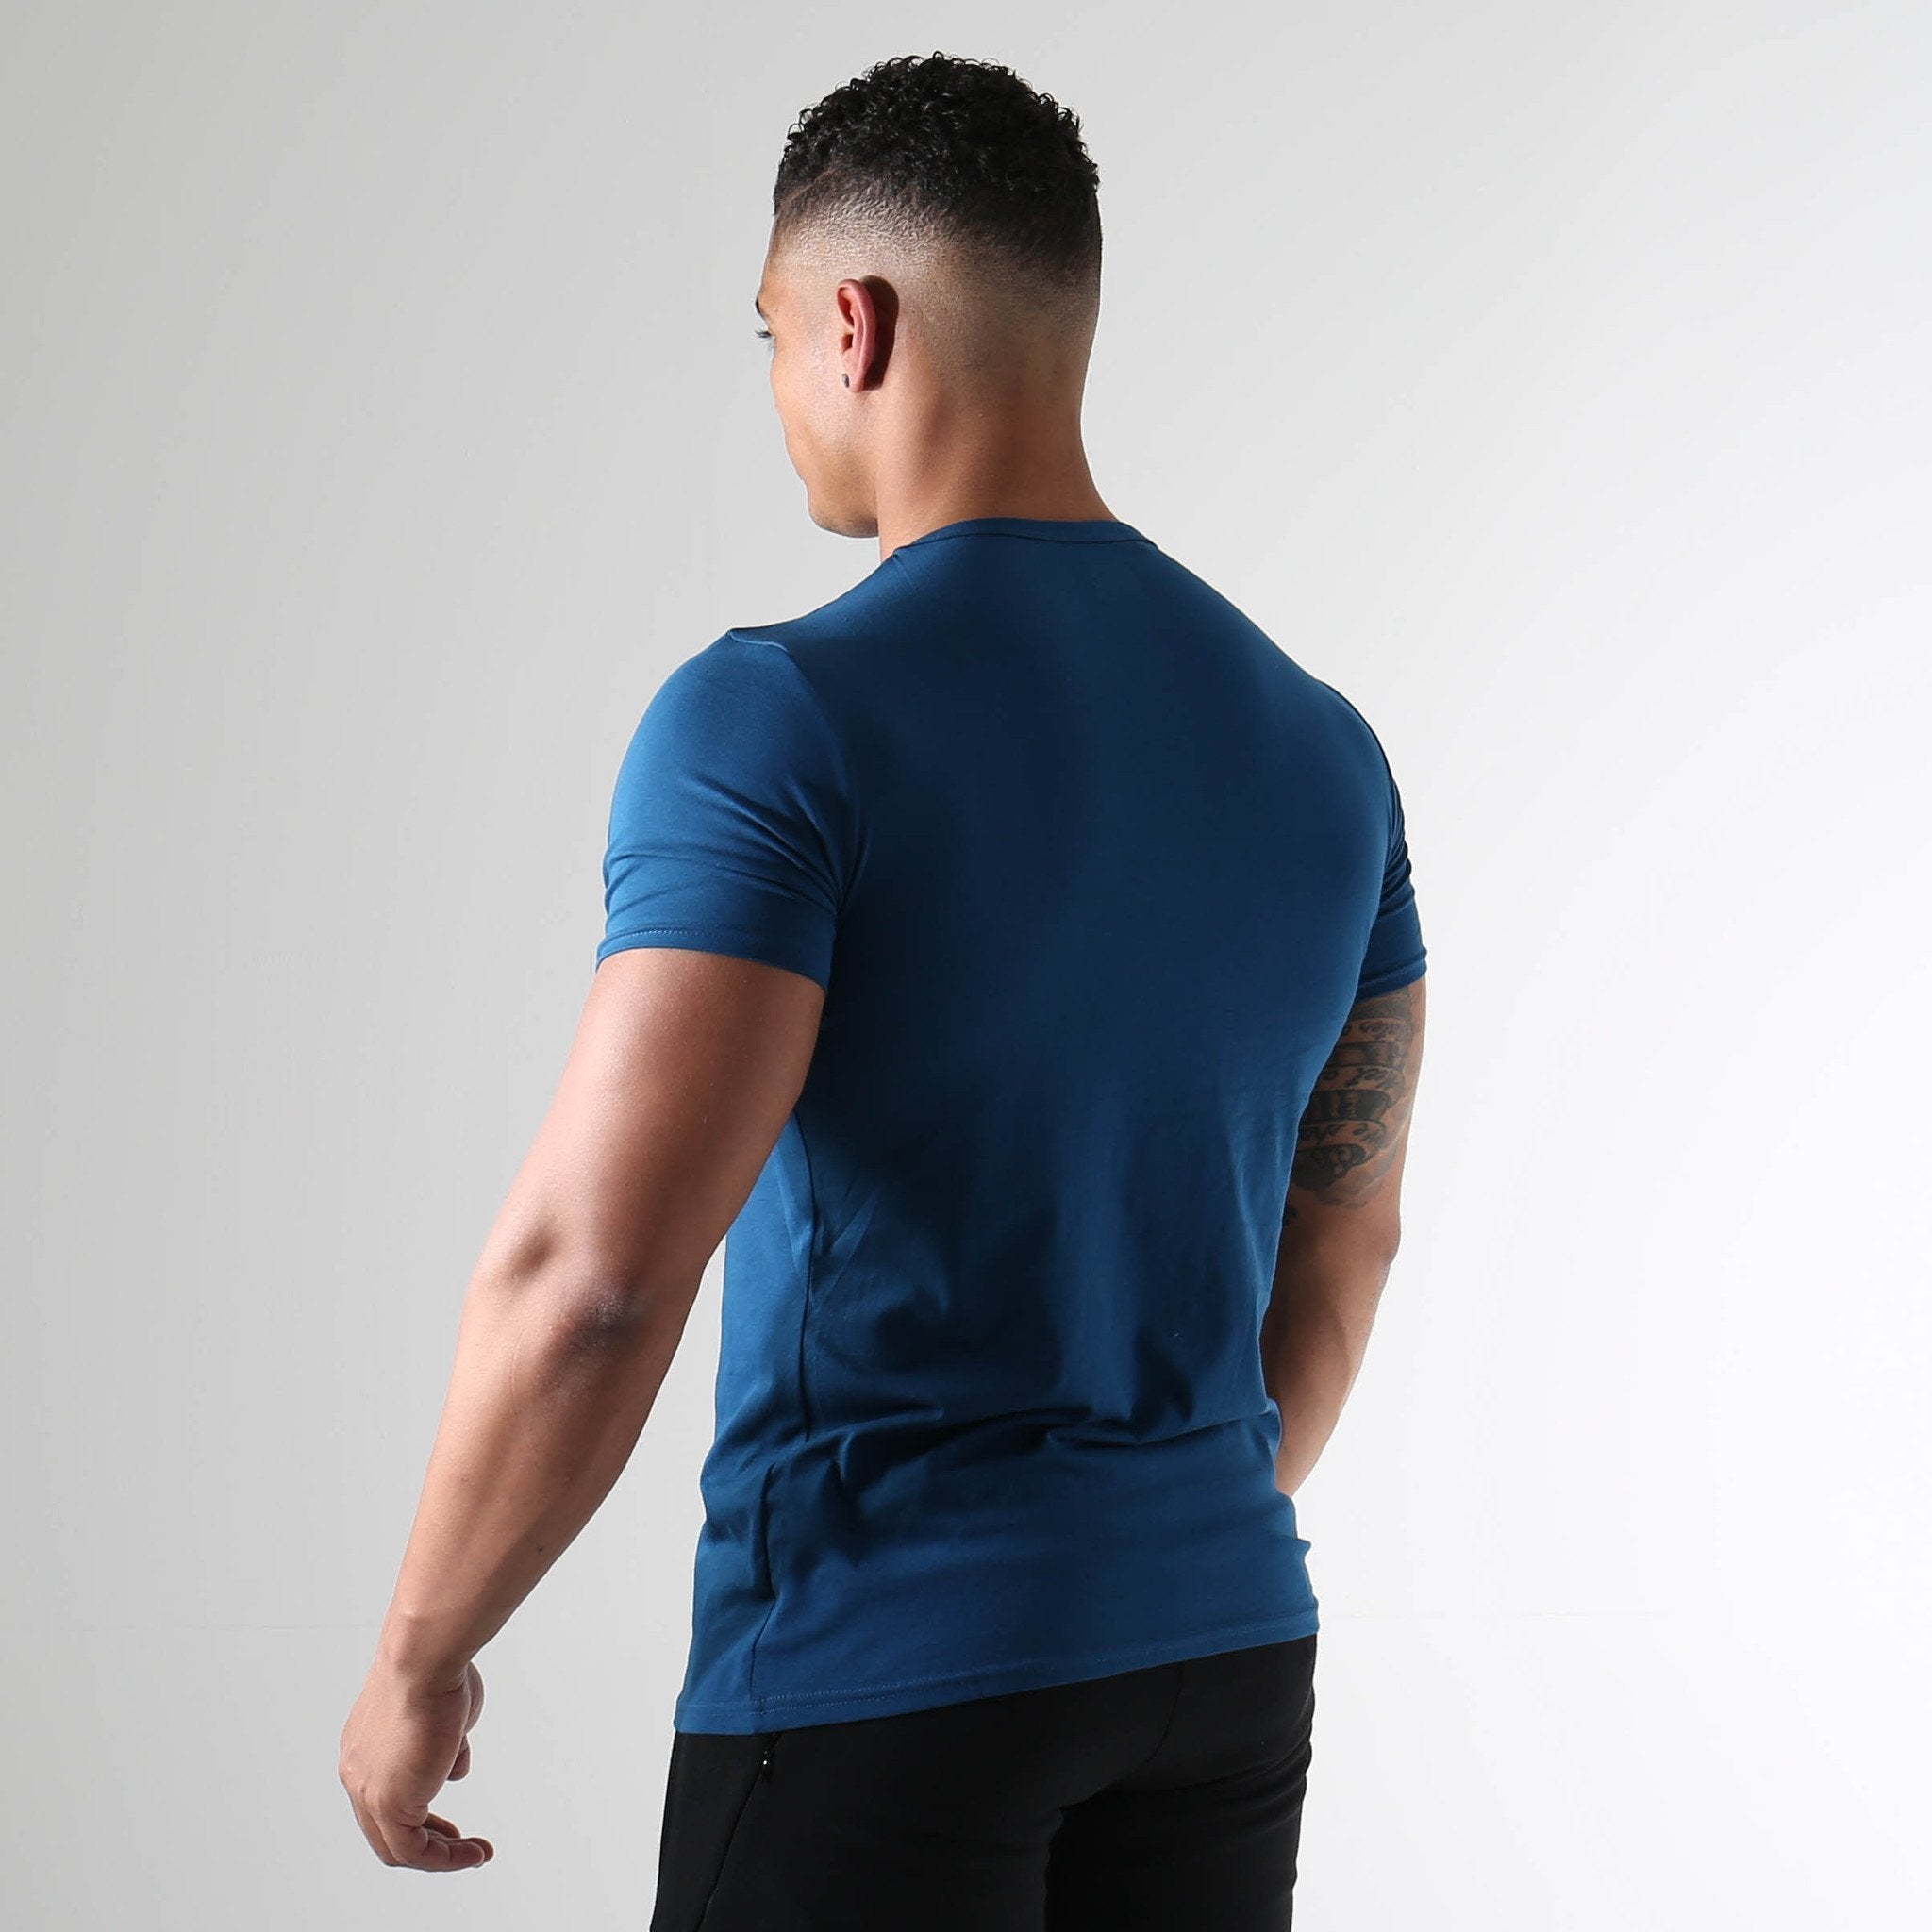 Fitness T-Shirt in Atlantic Blue - view 4